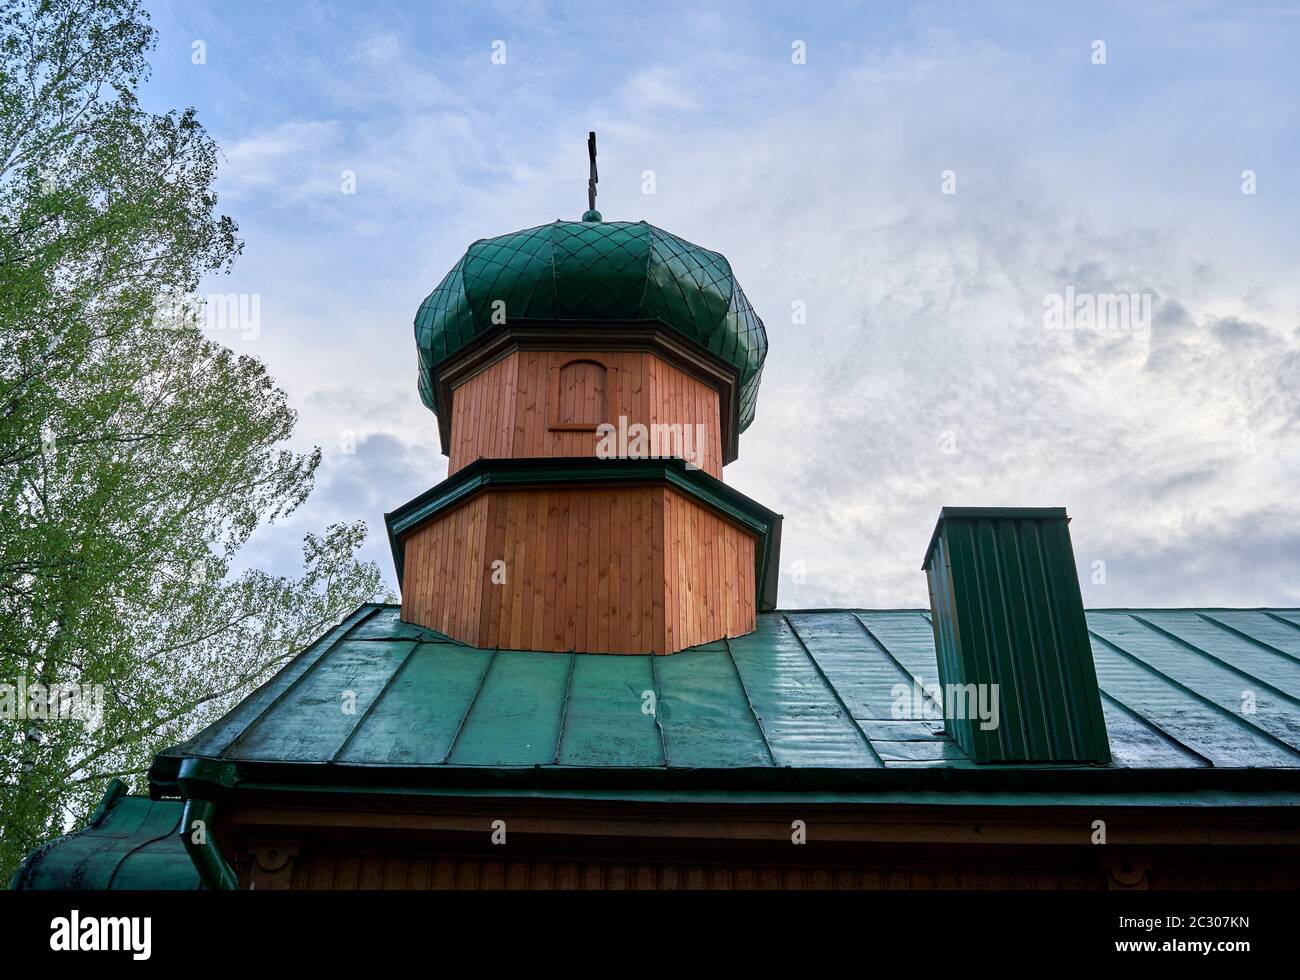 Wooden orthodox church tower with green roof Stock Photo